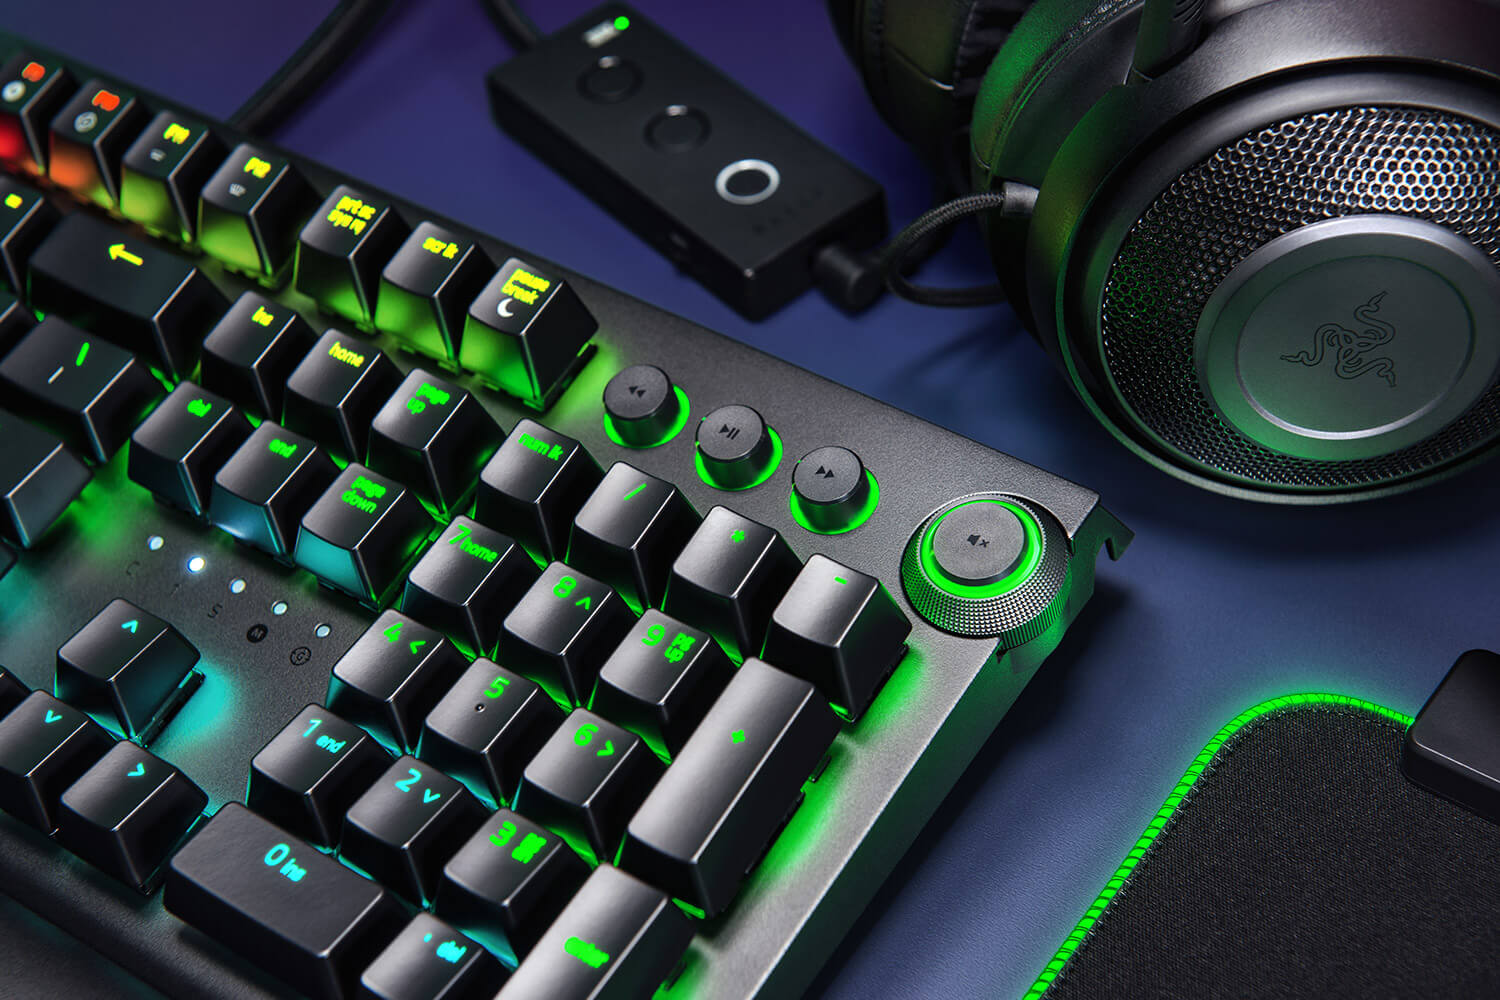 Razer BlackWidow Elite: Esports Gaming Keyboard - Multi-Function Digital Dial with Dedicated Media Controls - Ergonomic Wrist Rest - Razer Green Mechanical Switches (Tactile and Clicky)